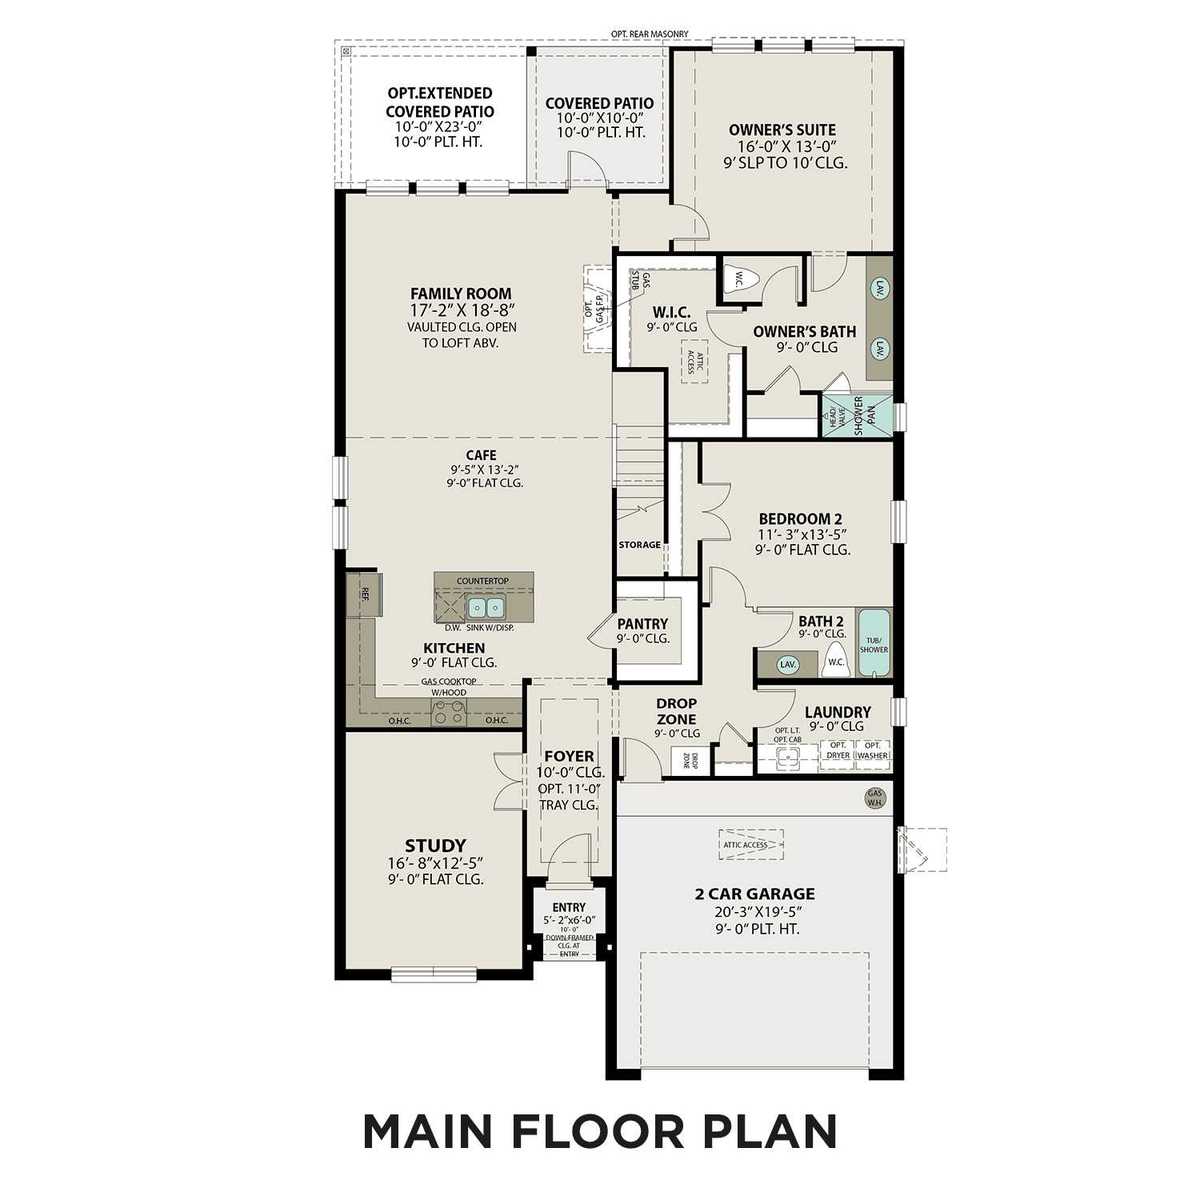 1 - The Zion A buildable floor plan layout in Davidson Homes' The Signature Series at Lago Mar community.